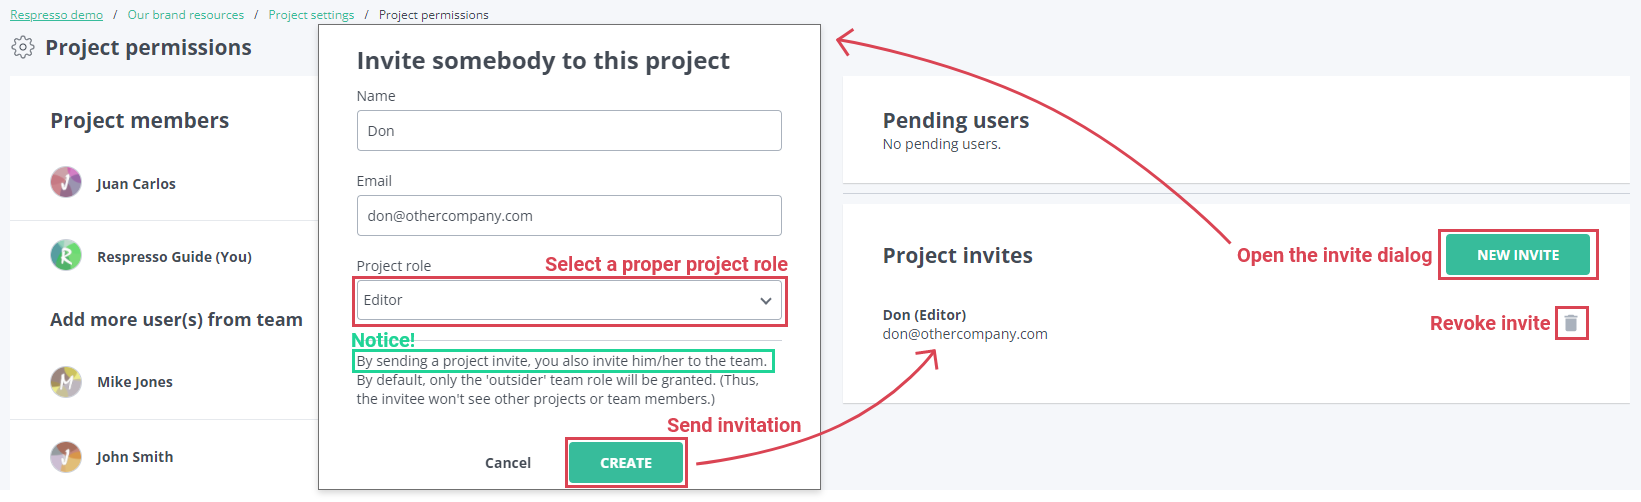 How to invite an outsider to a project in Respresso